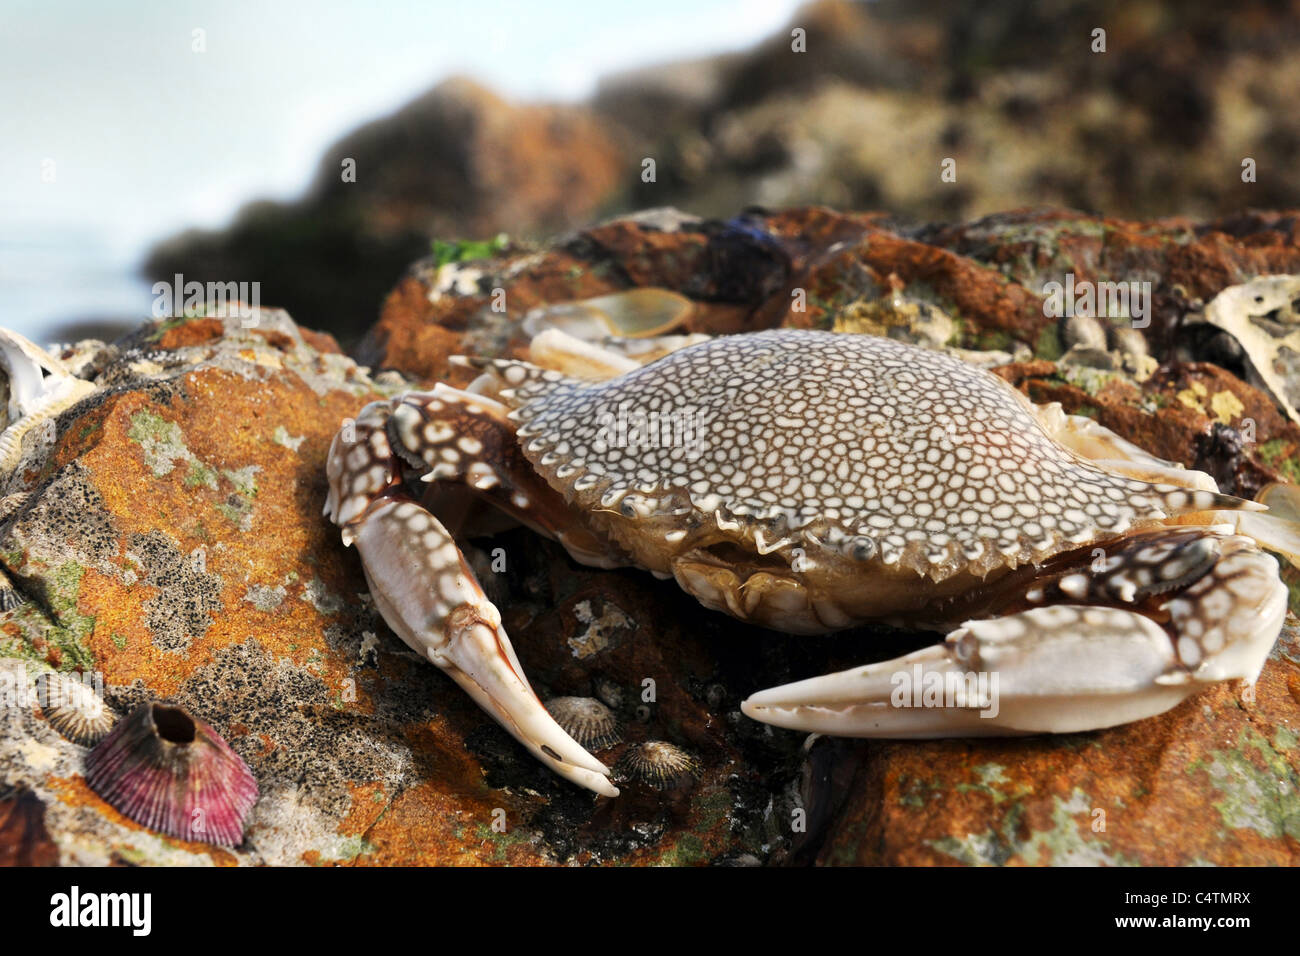 This is a Speckled Crab on the beach at Sunset. It is commonly referred to as the Swimming Crab. Stock Photo